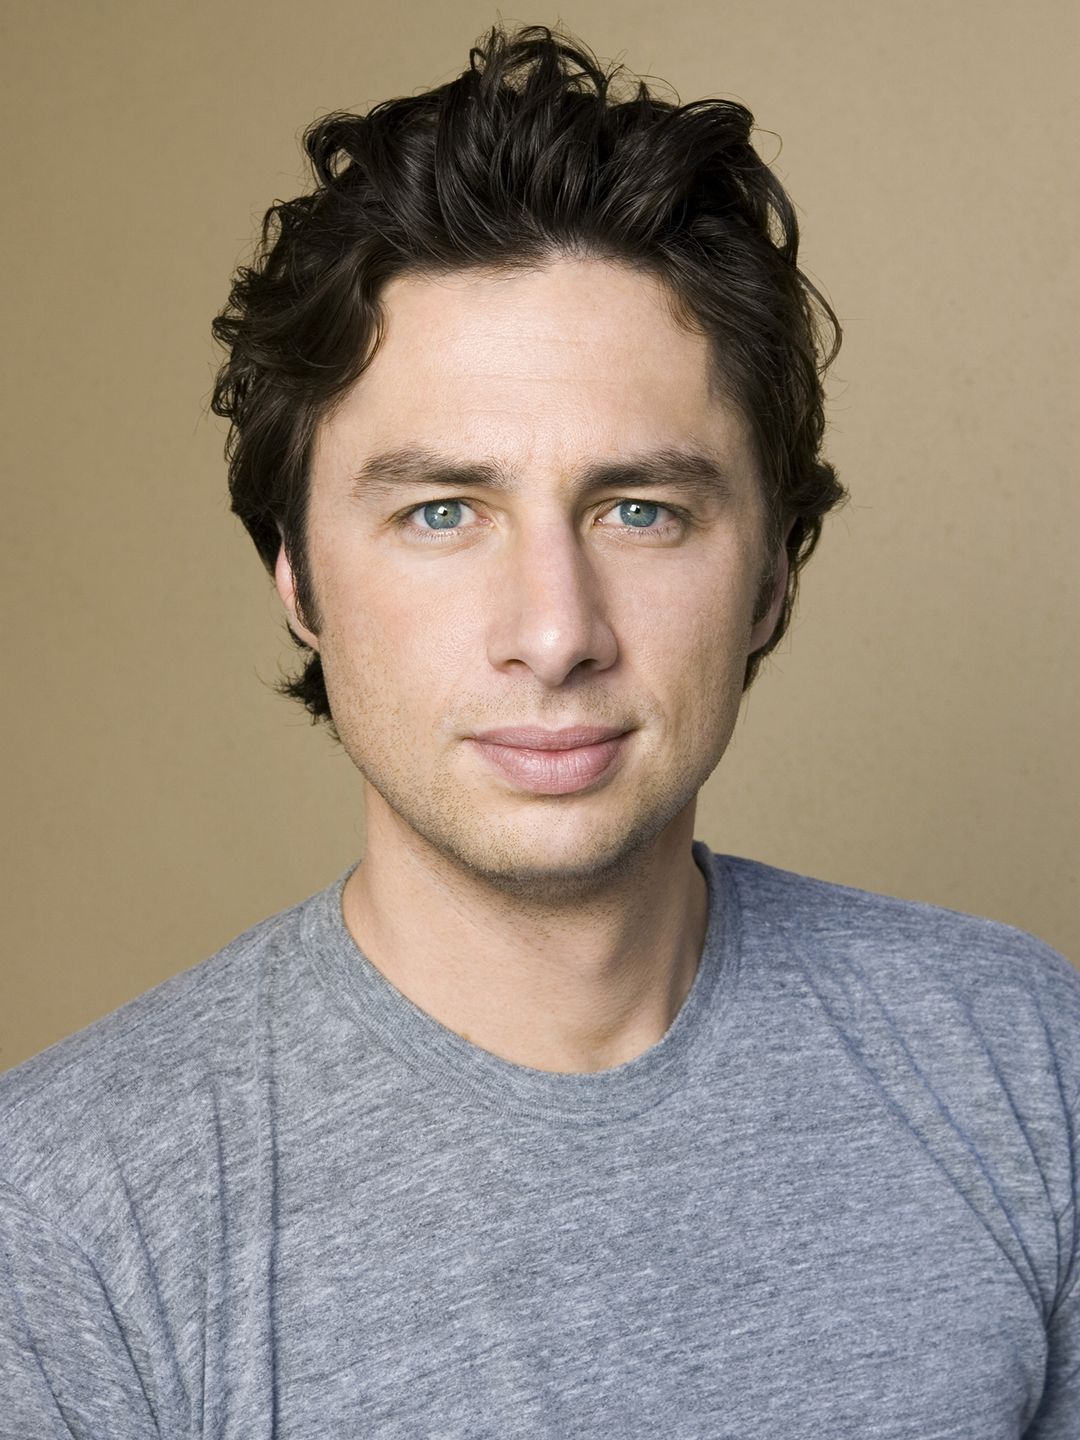 Zach Braff does he have a wife